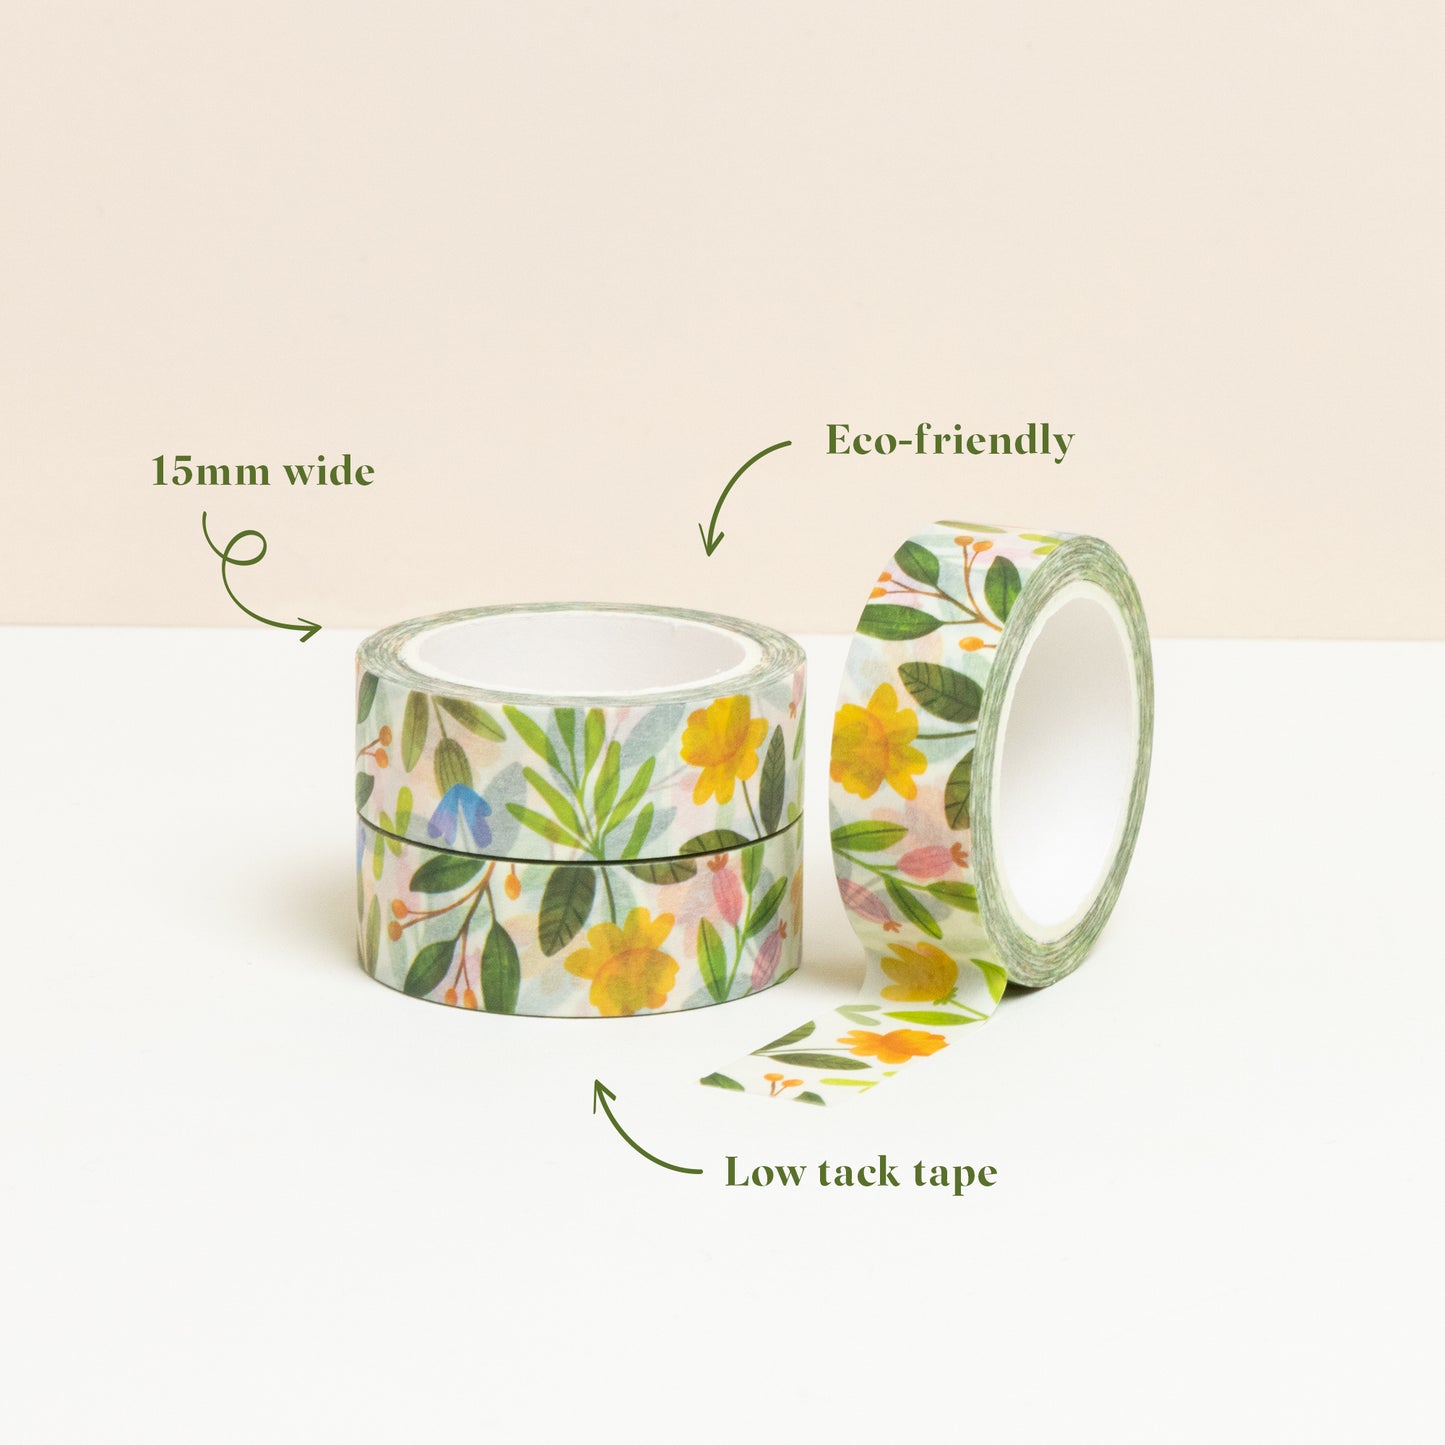 Eco-friendly floral washi tape